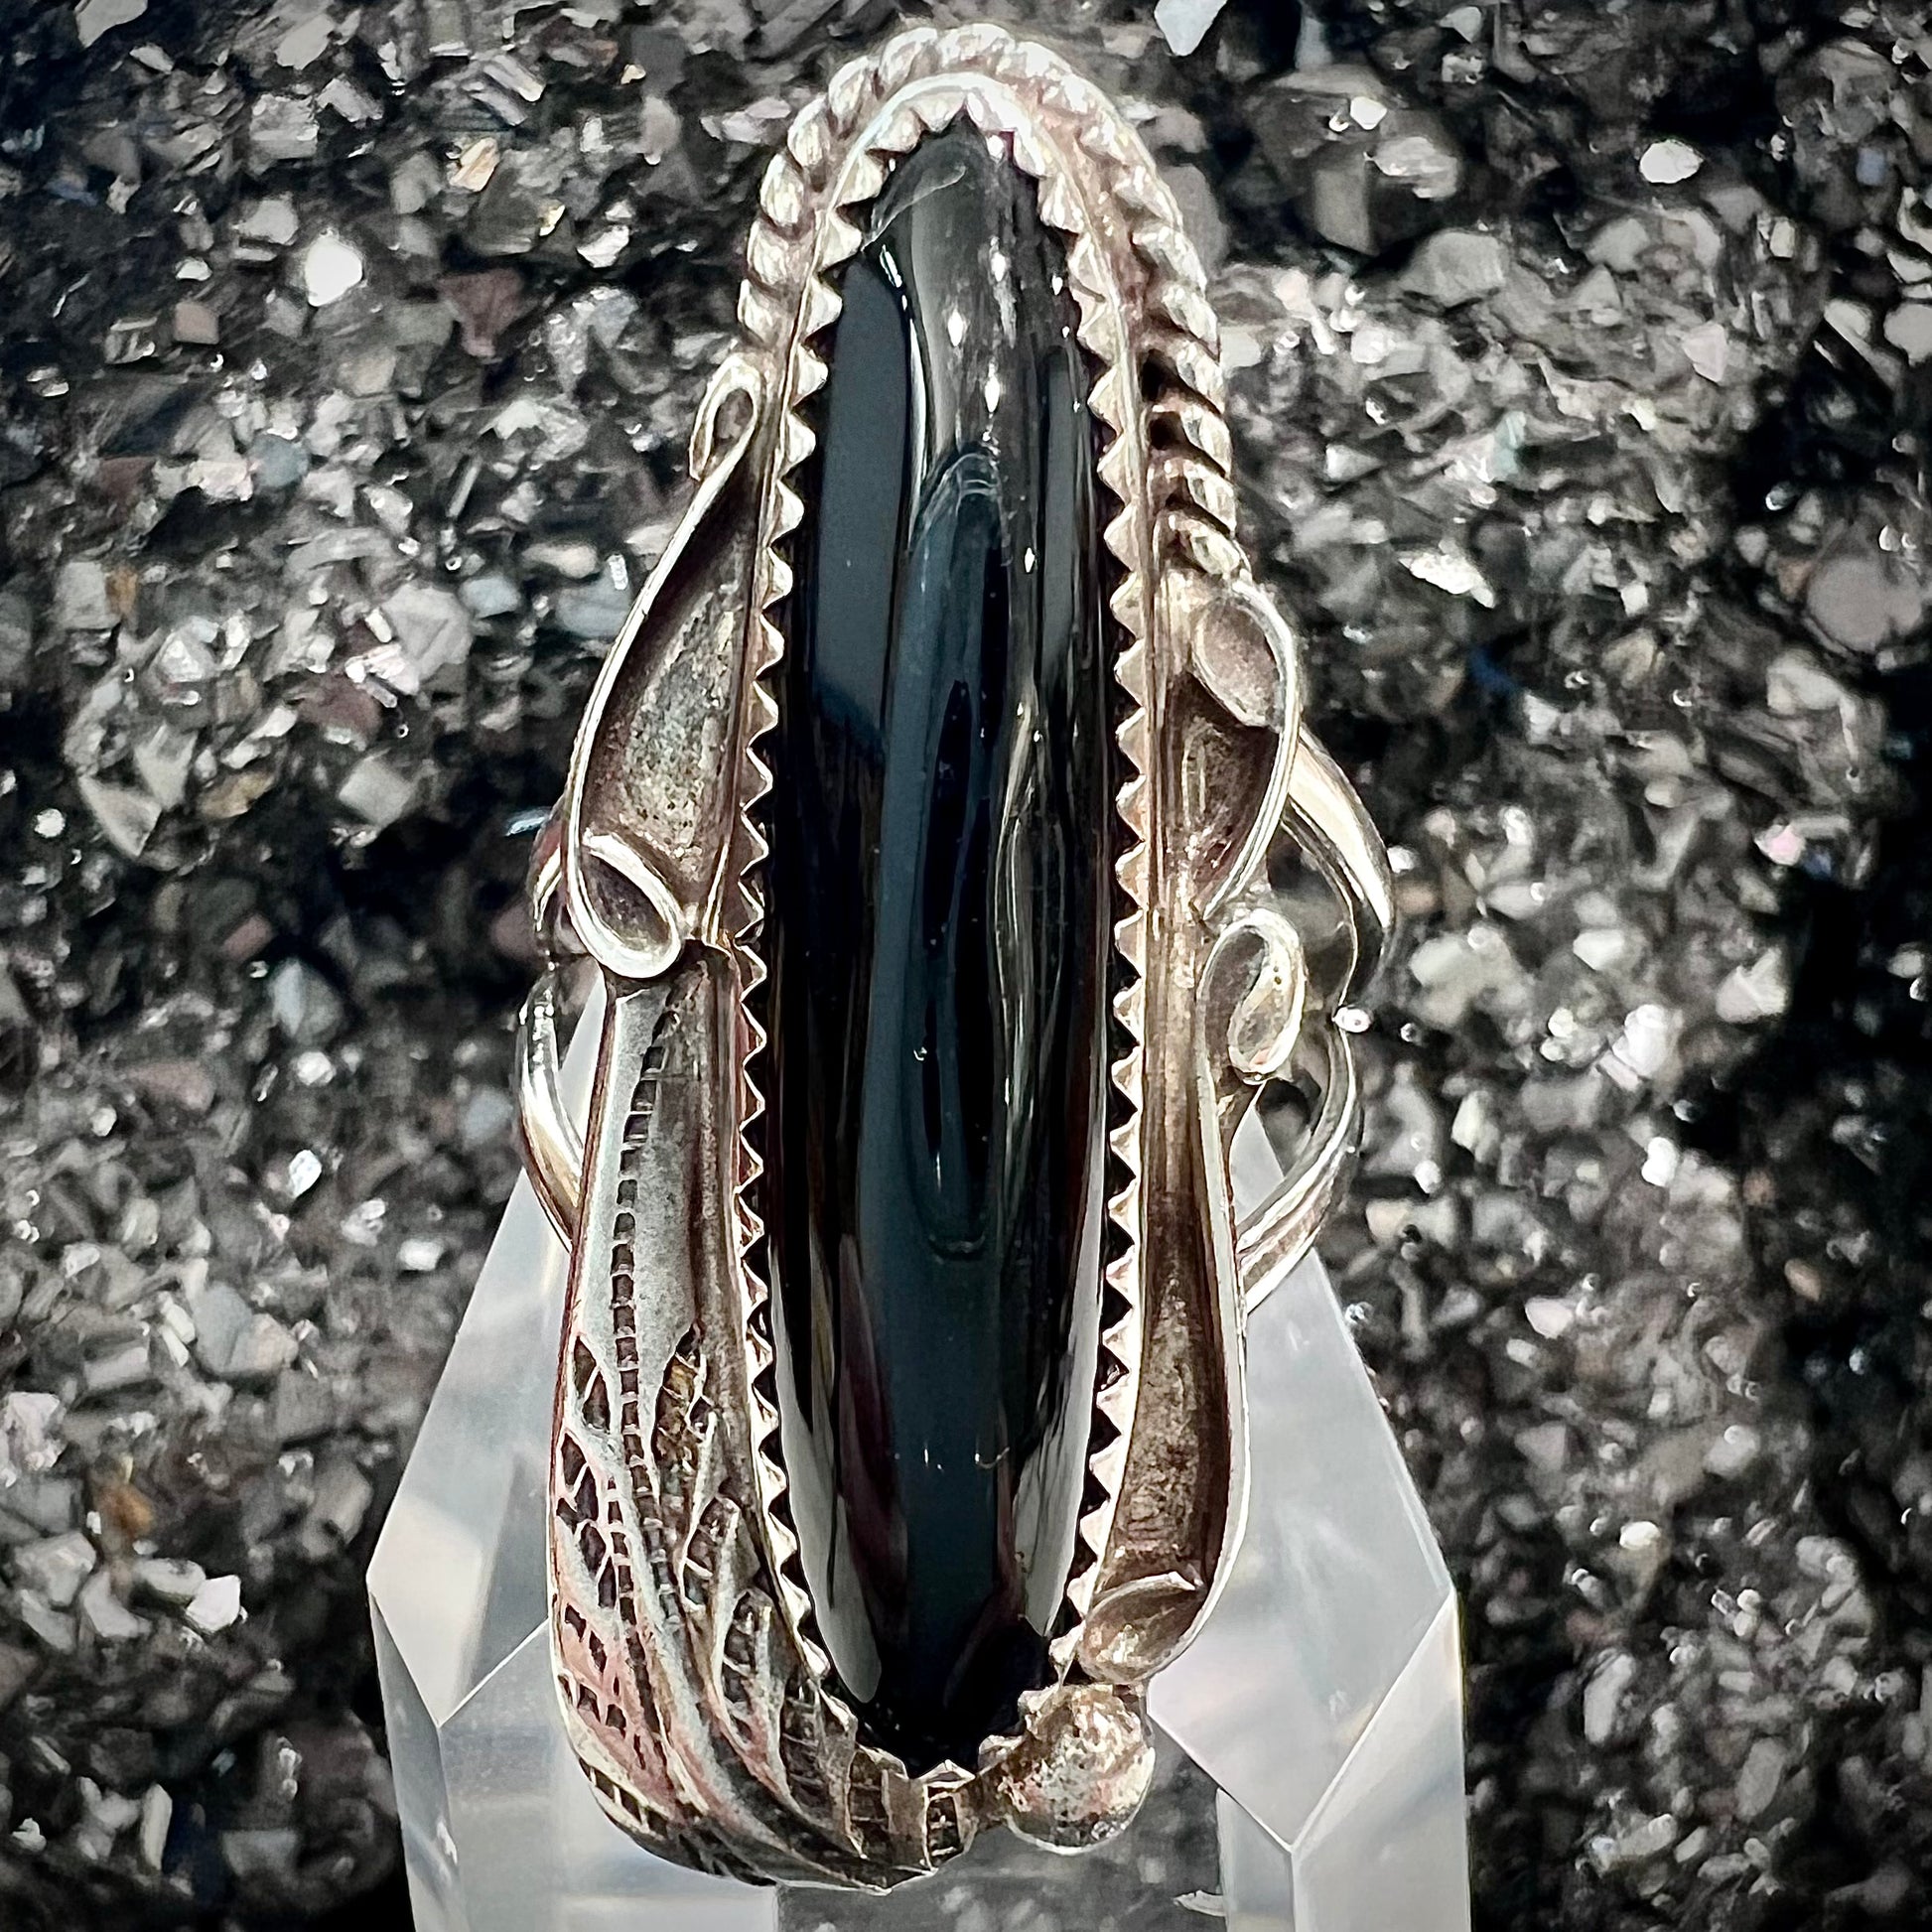 A sterling silver Navajo style onyx ring.